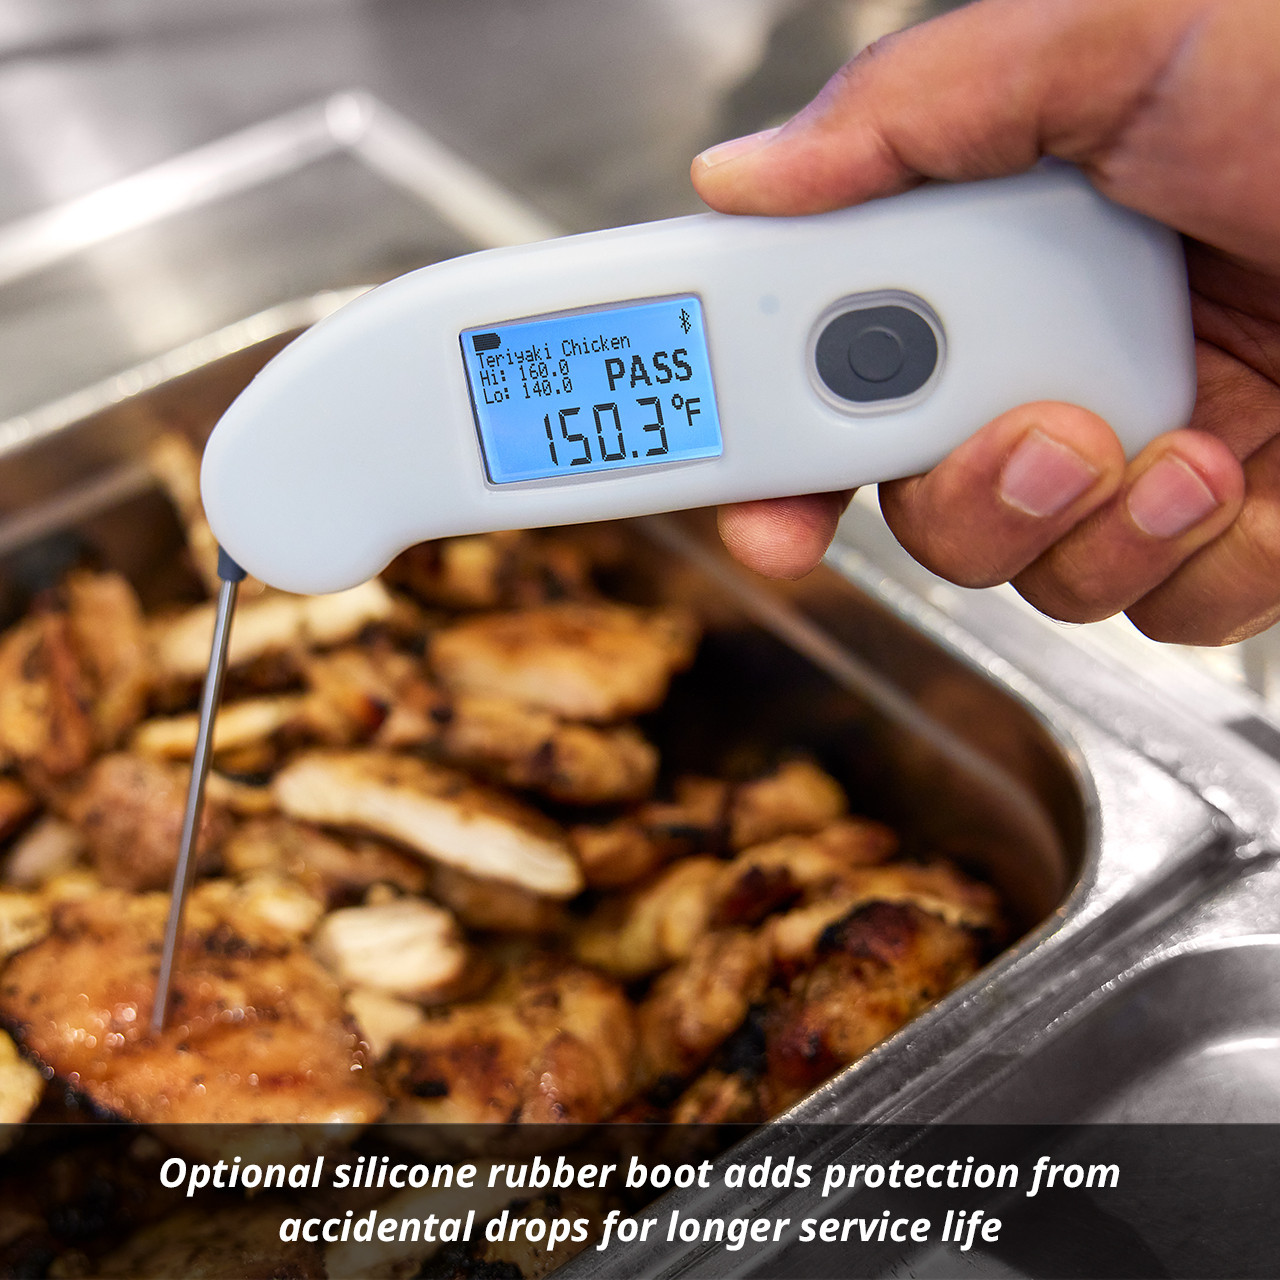 https://cdn11.bigcommerce.com/s-2mj19jirgg/images/stencil/1280x1280/products/1146/3454/Thermapen-One-Blue_silicone-boot__28898.1695739384.jpg?c=1